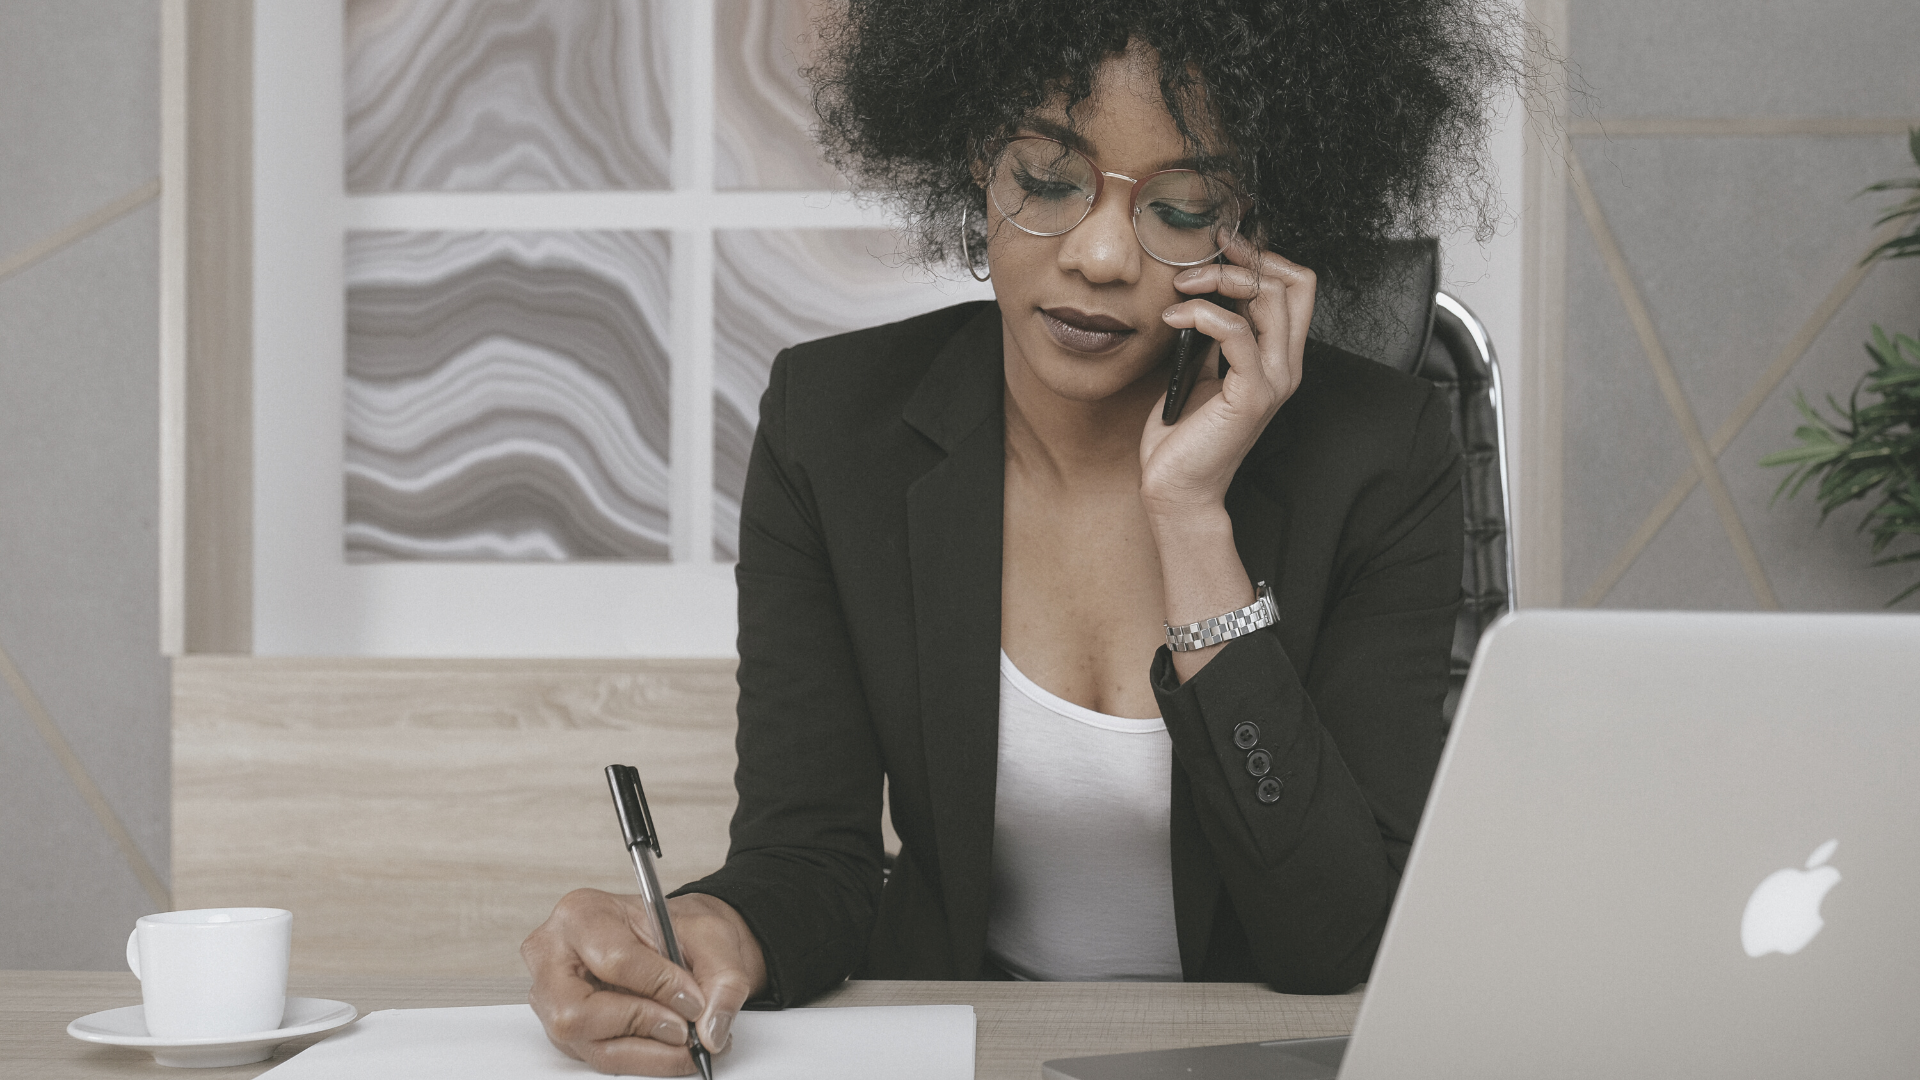 black woman wearing suit sat at desk on phone writing